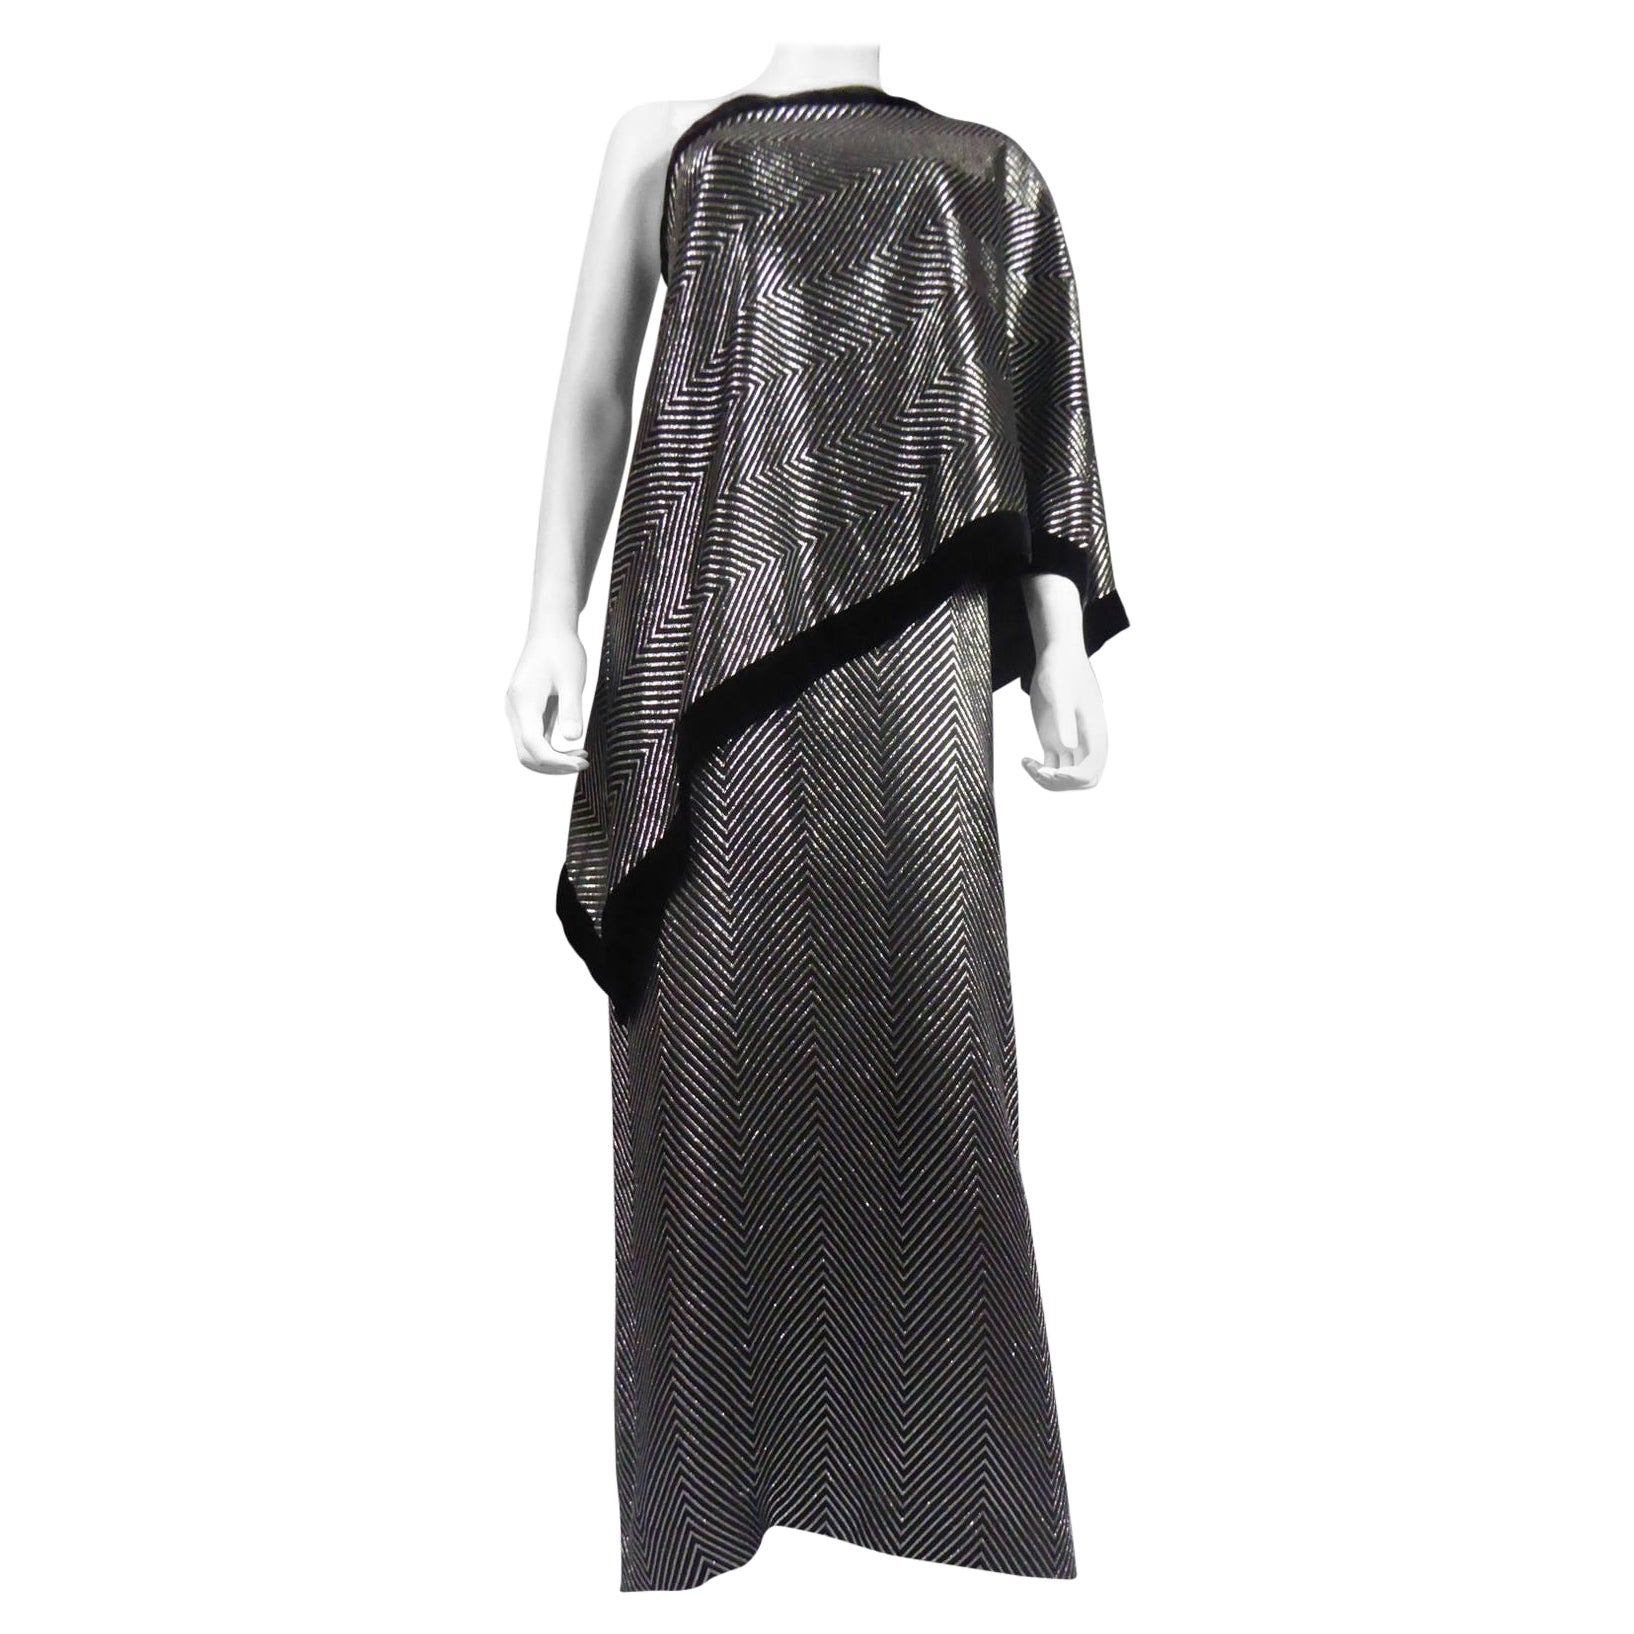 Circa 1990
Italy

A Gucci velvet and silver lamé asymmetric tube dress. Wide herringbone patterns of metallic threads. Sleeve on the left side of the cape, cape point on the right side falling on the hips. White label, black graphic, G.GUCCI, size